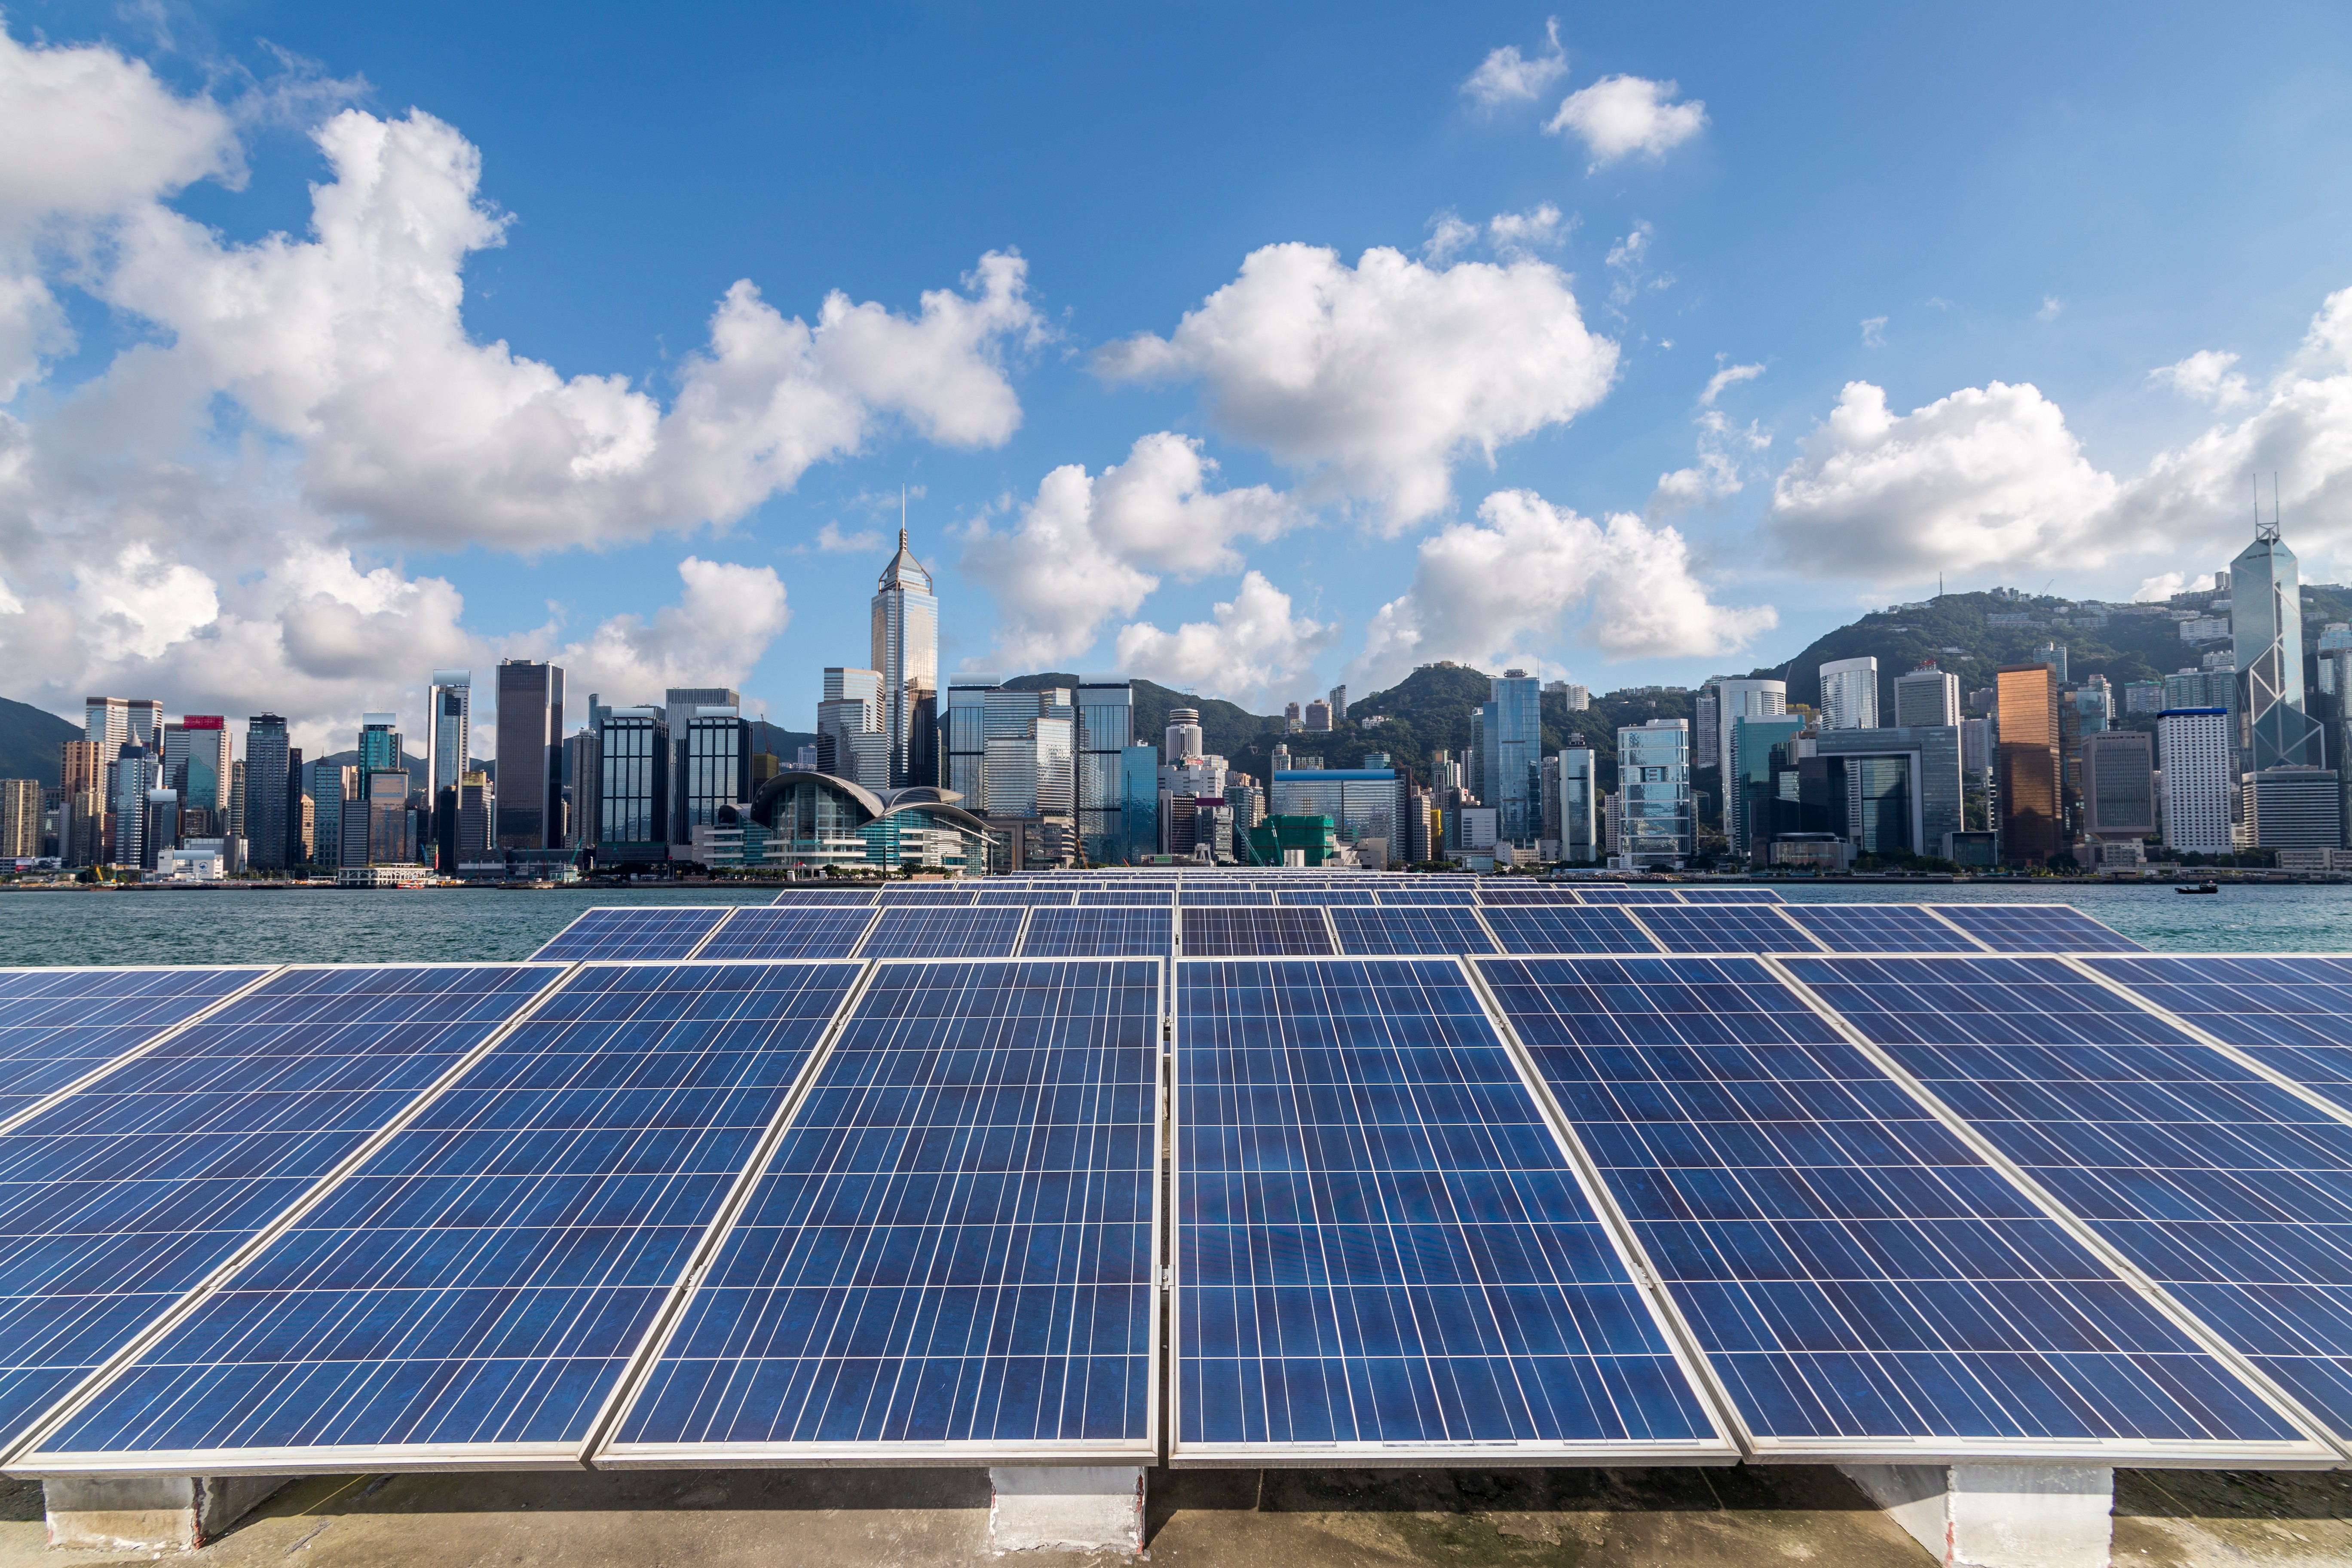 Surveys show that Hong Kong residents are mostly open to the shift to clean energy. 